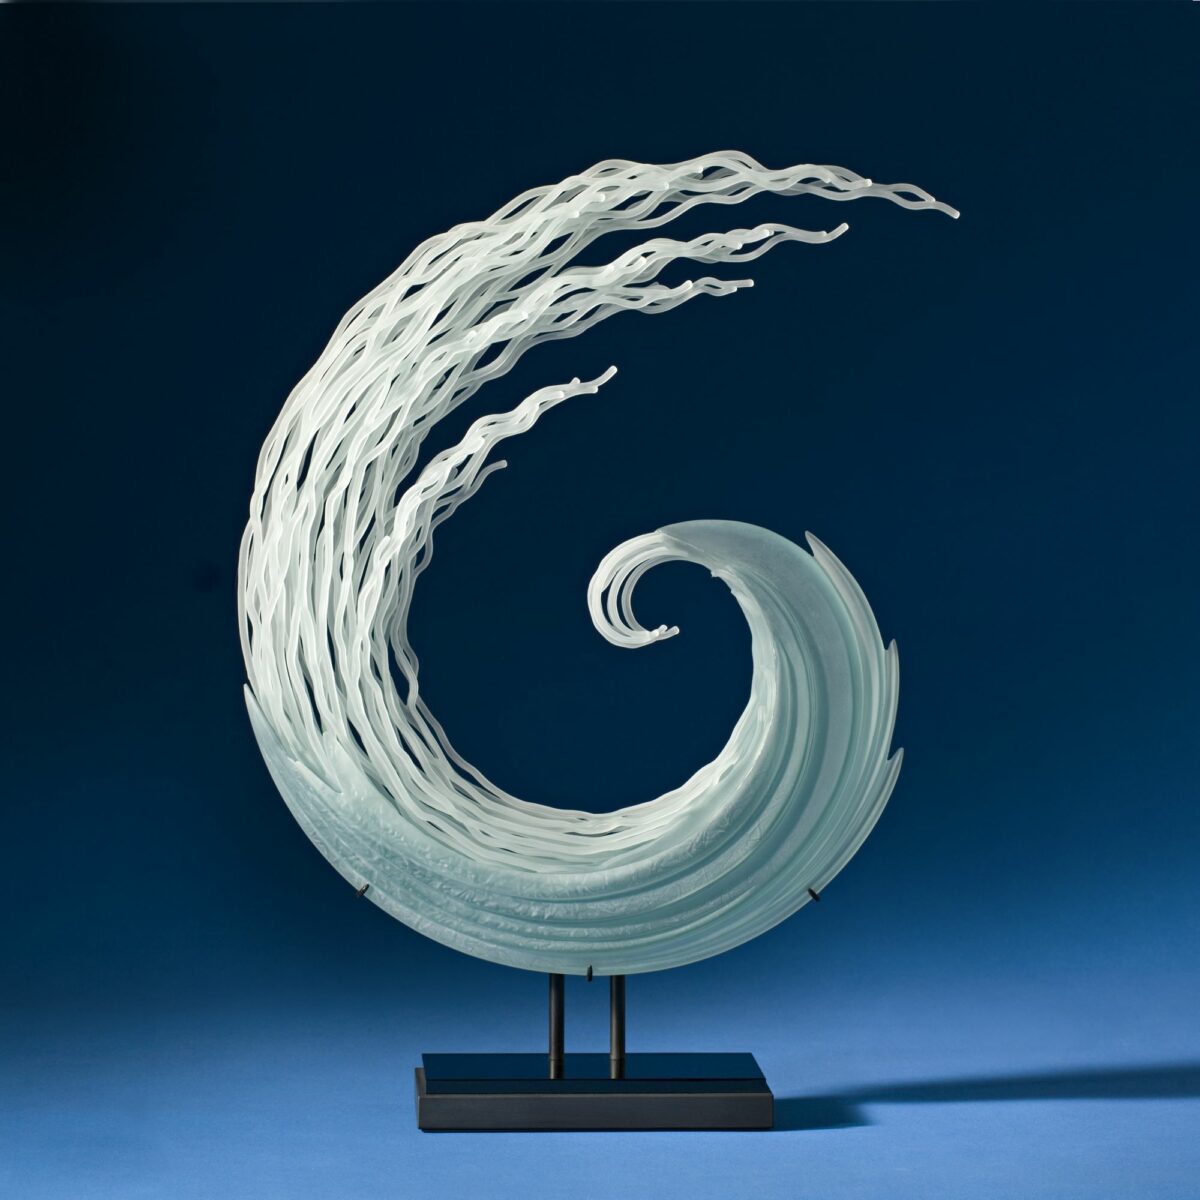 Sublime Glass Sculptures Inspired By Waves And Sea Creatures By K. William Lequier (2)